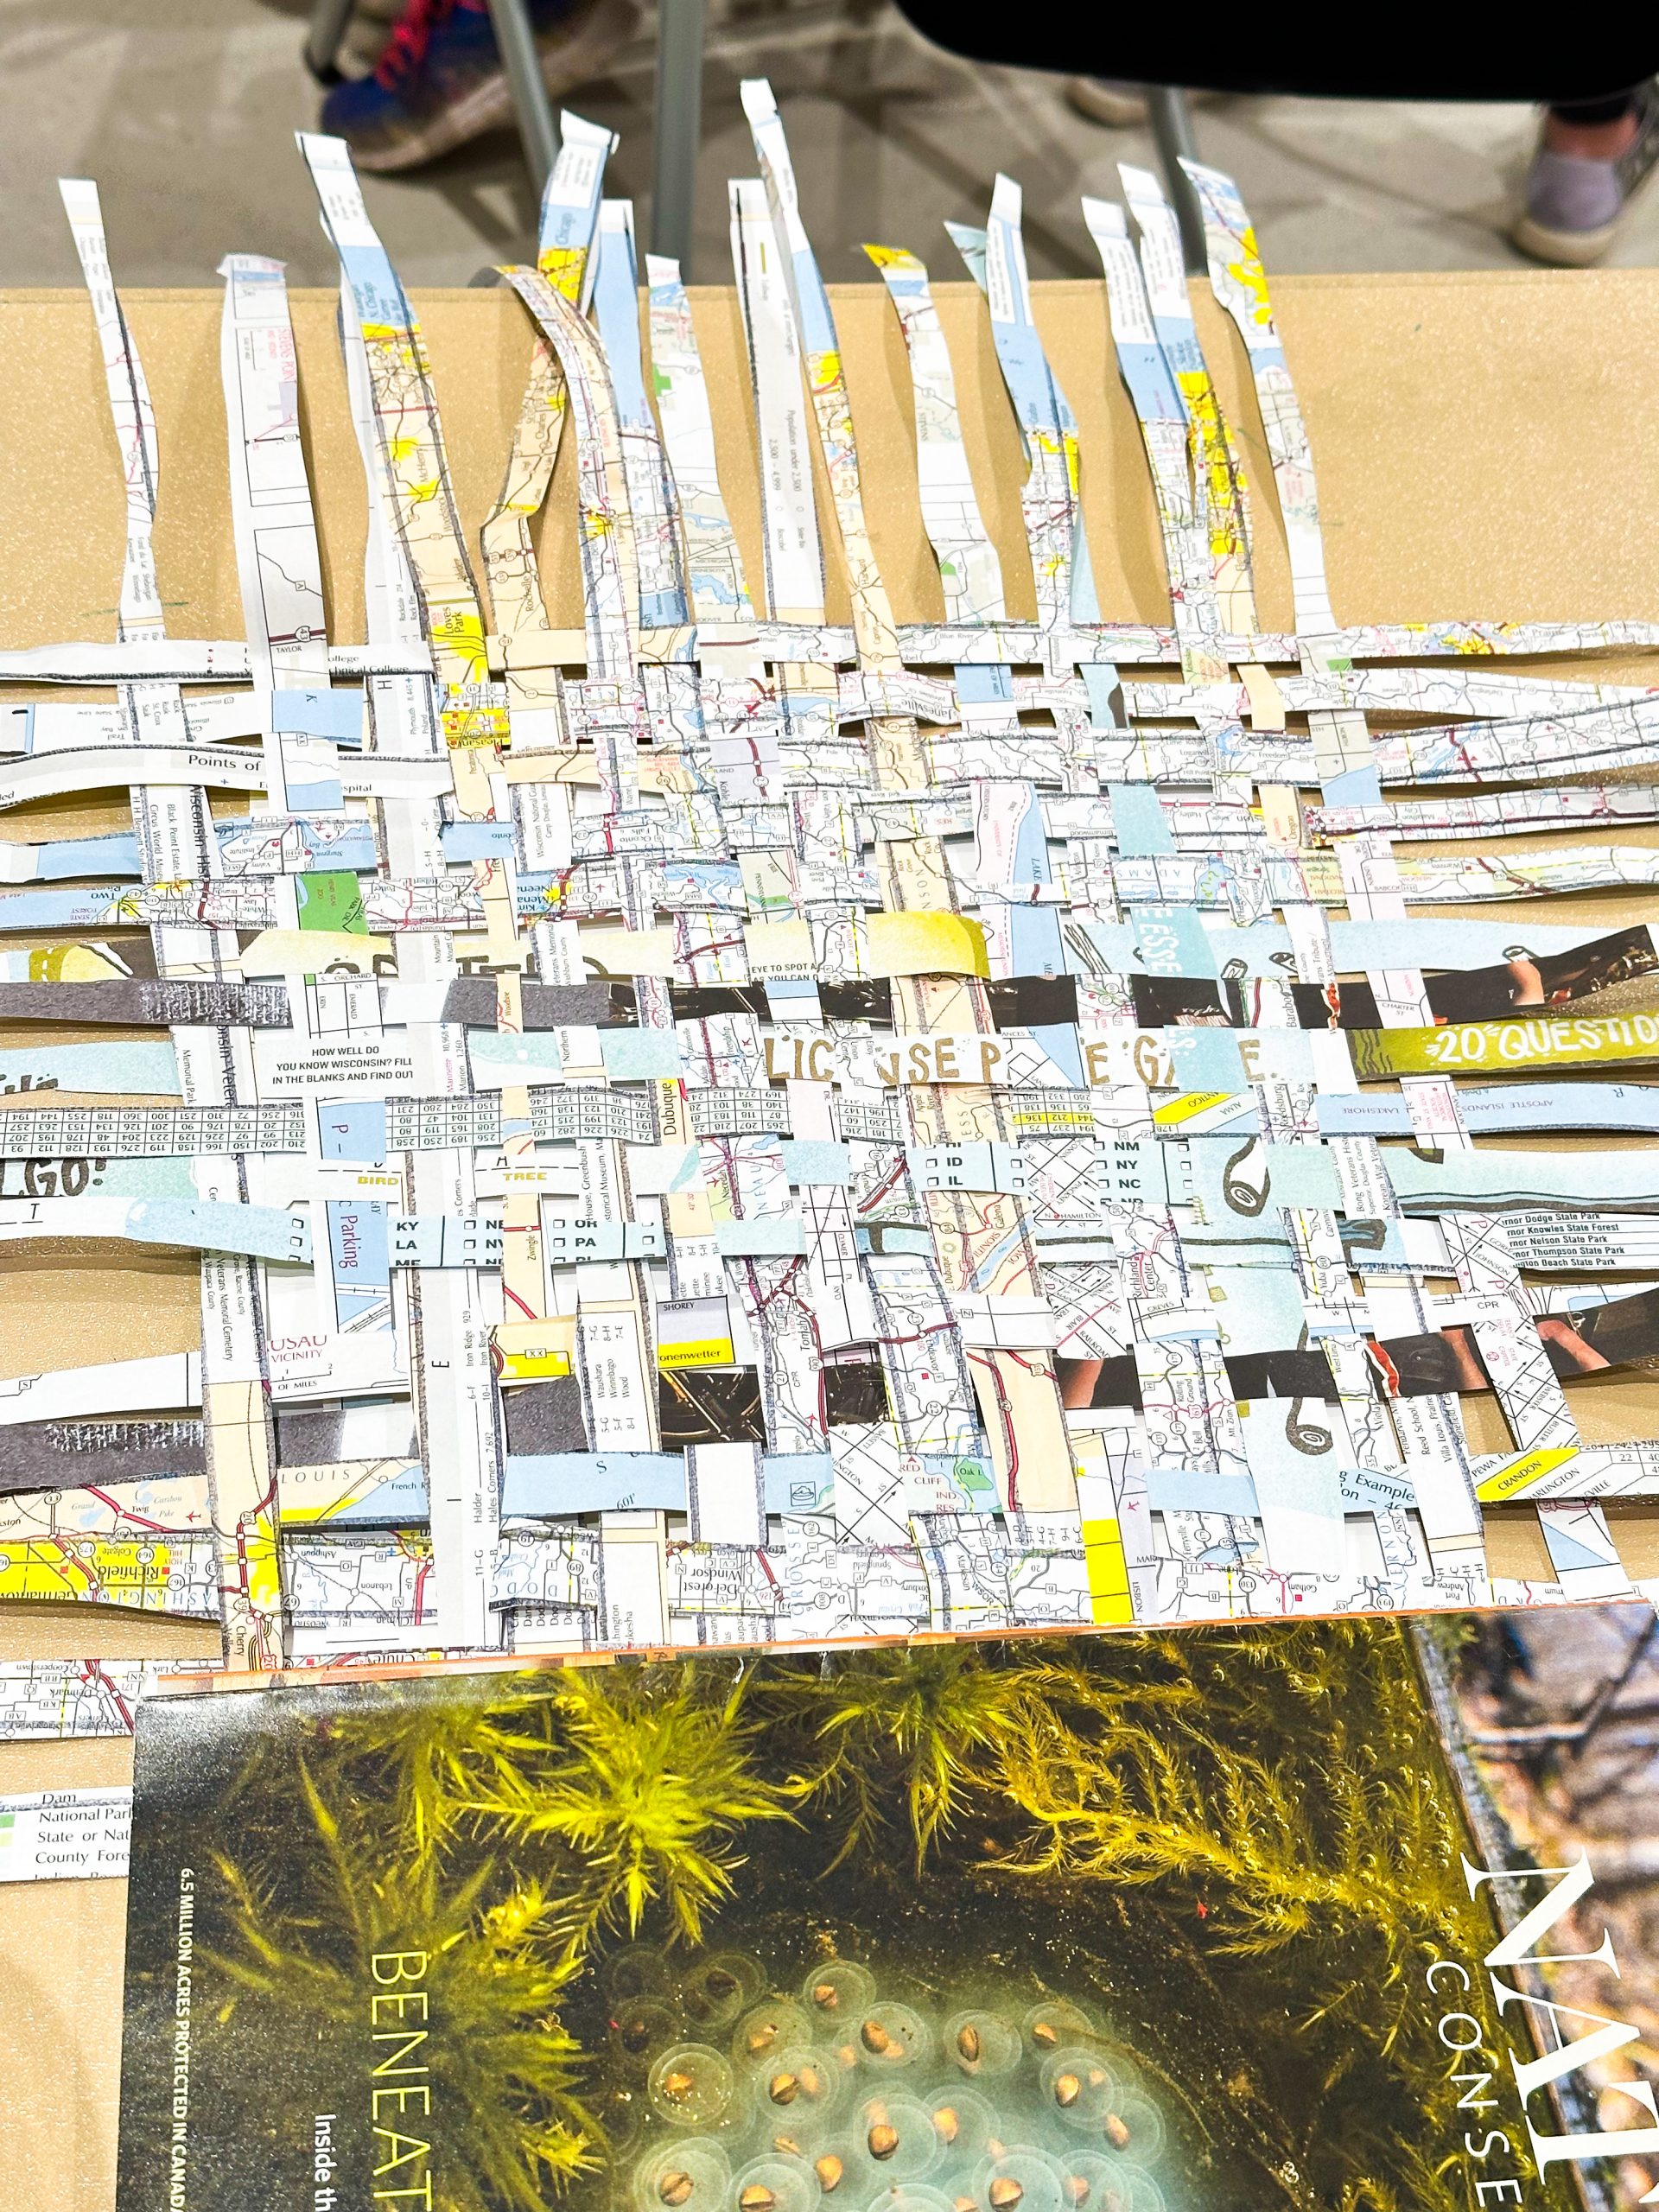 Strips of maps are cut and woven together to create the outside cover of a sketchbook